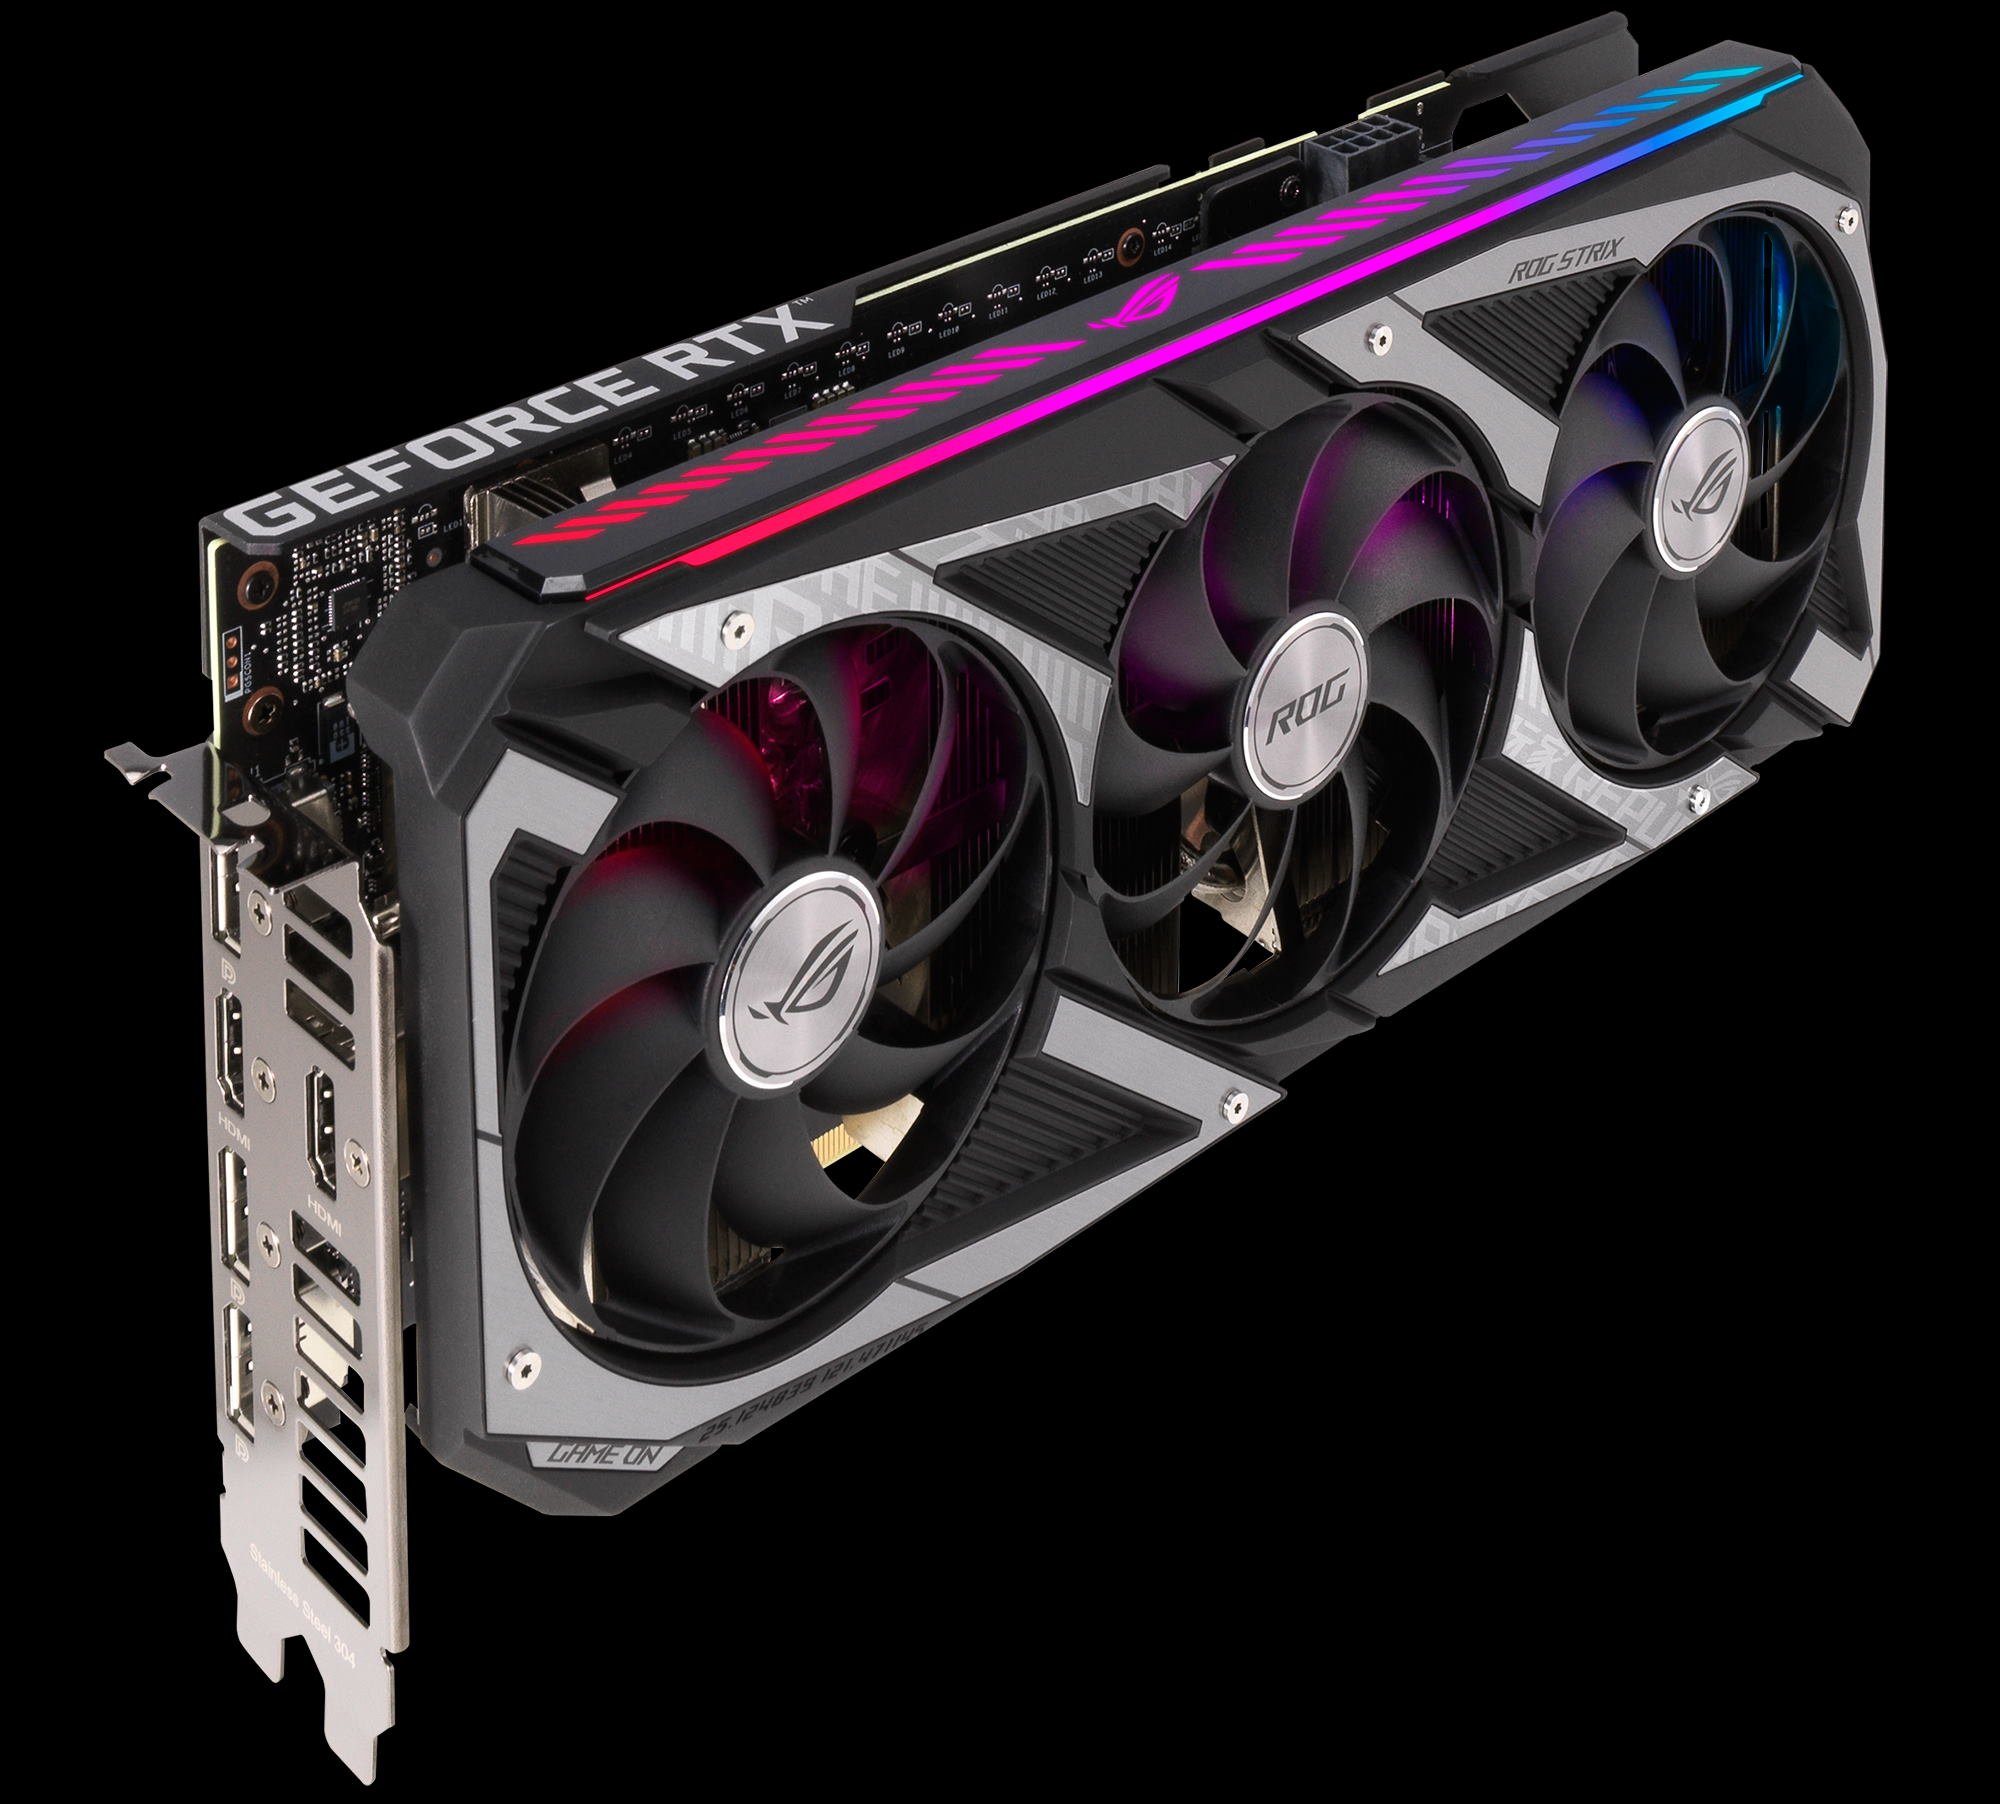 NVIDIA's GeForce RTX 30 Series Family Grows With New ASUS GeForce RTX 3050 Graphics Cards. ROG Of Gamers Global